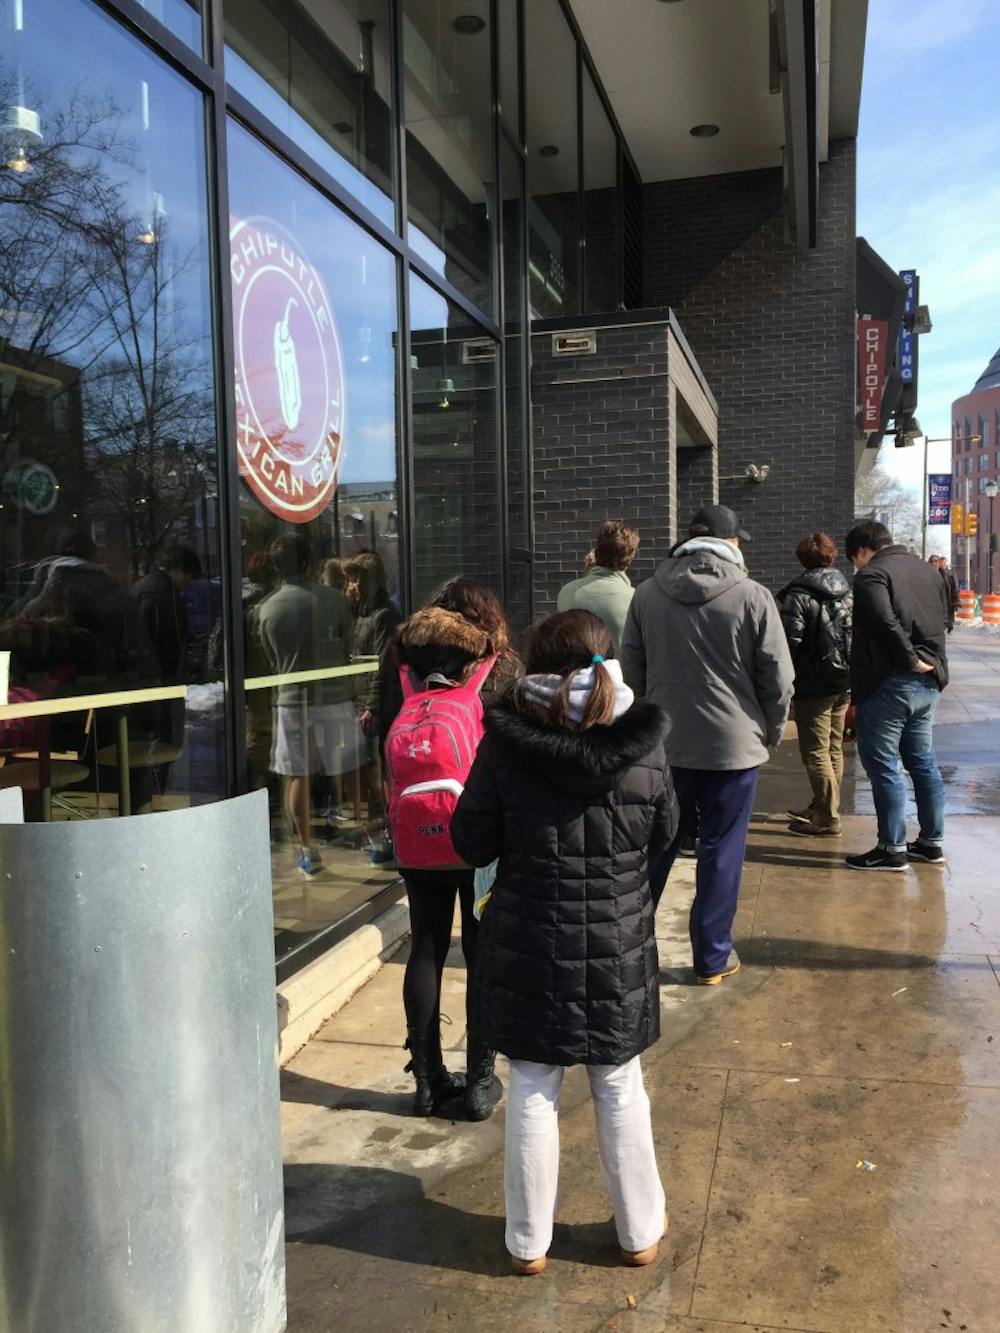 People lined up outside Chipotle shortly before 1 p.m., when it said it would open.